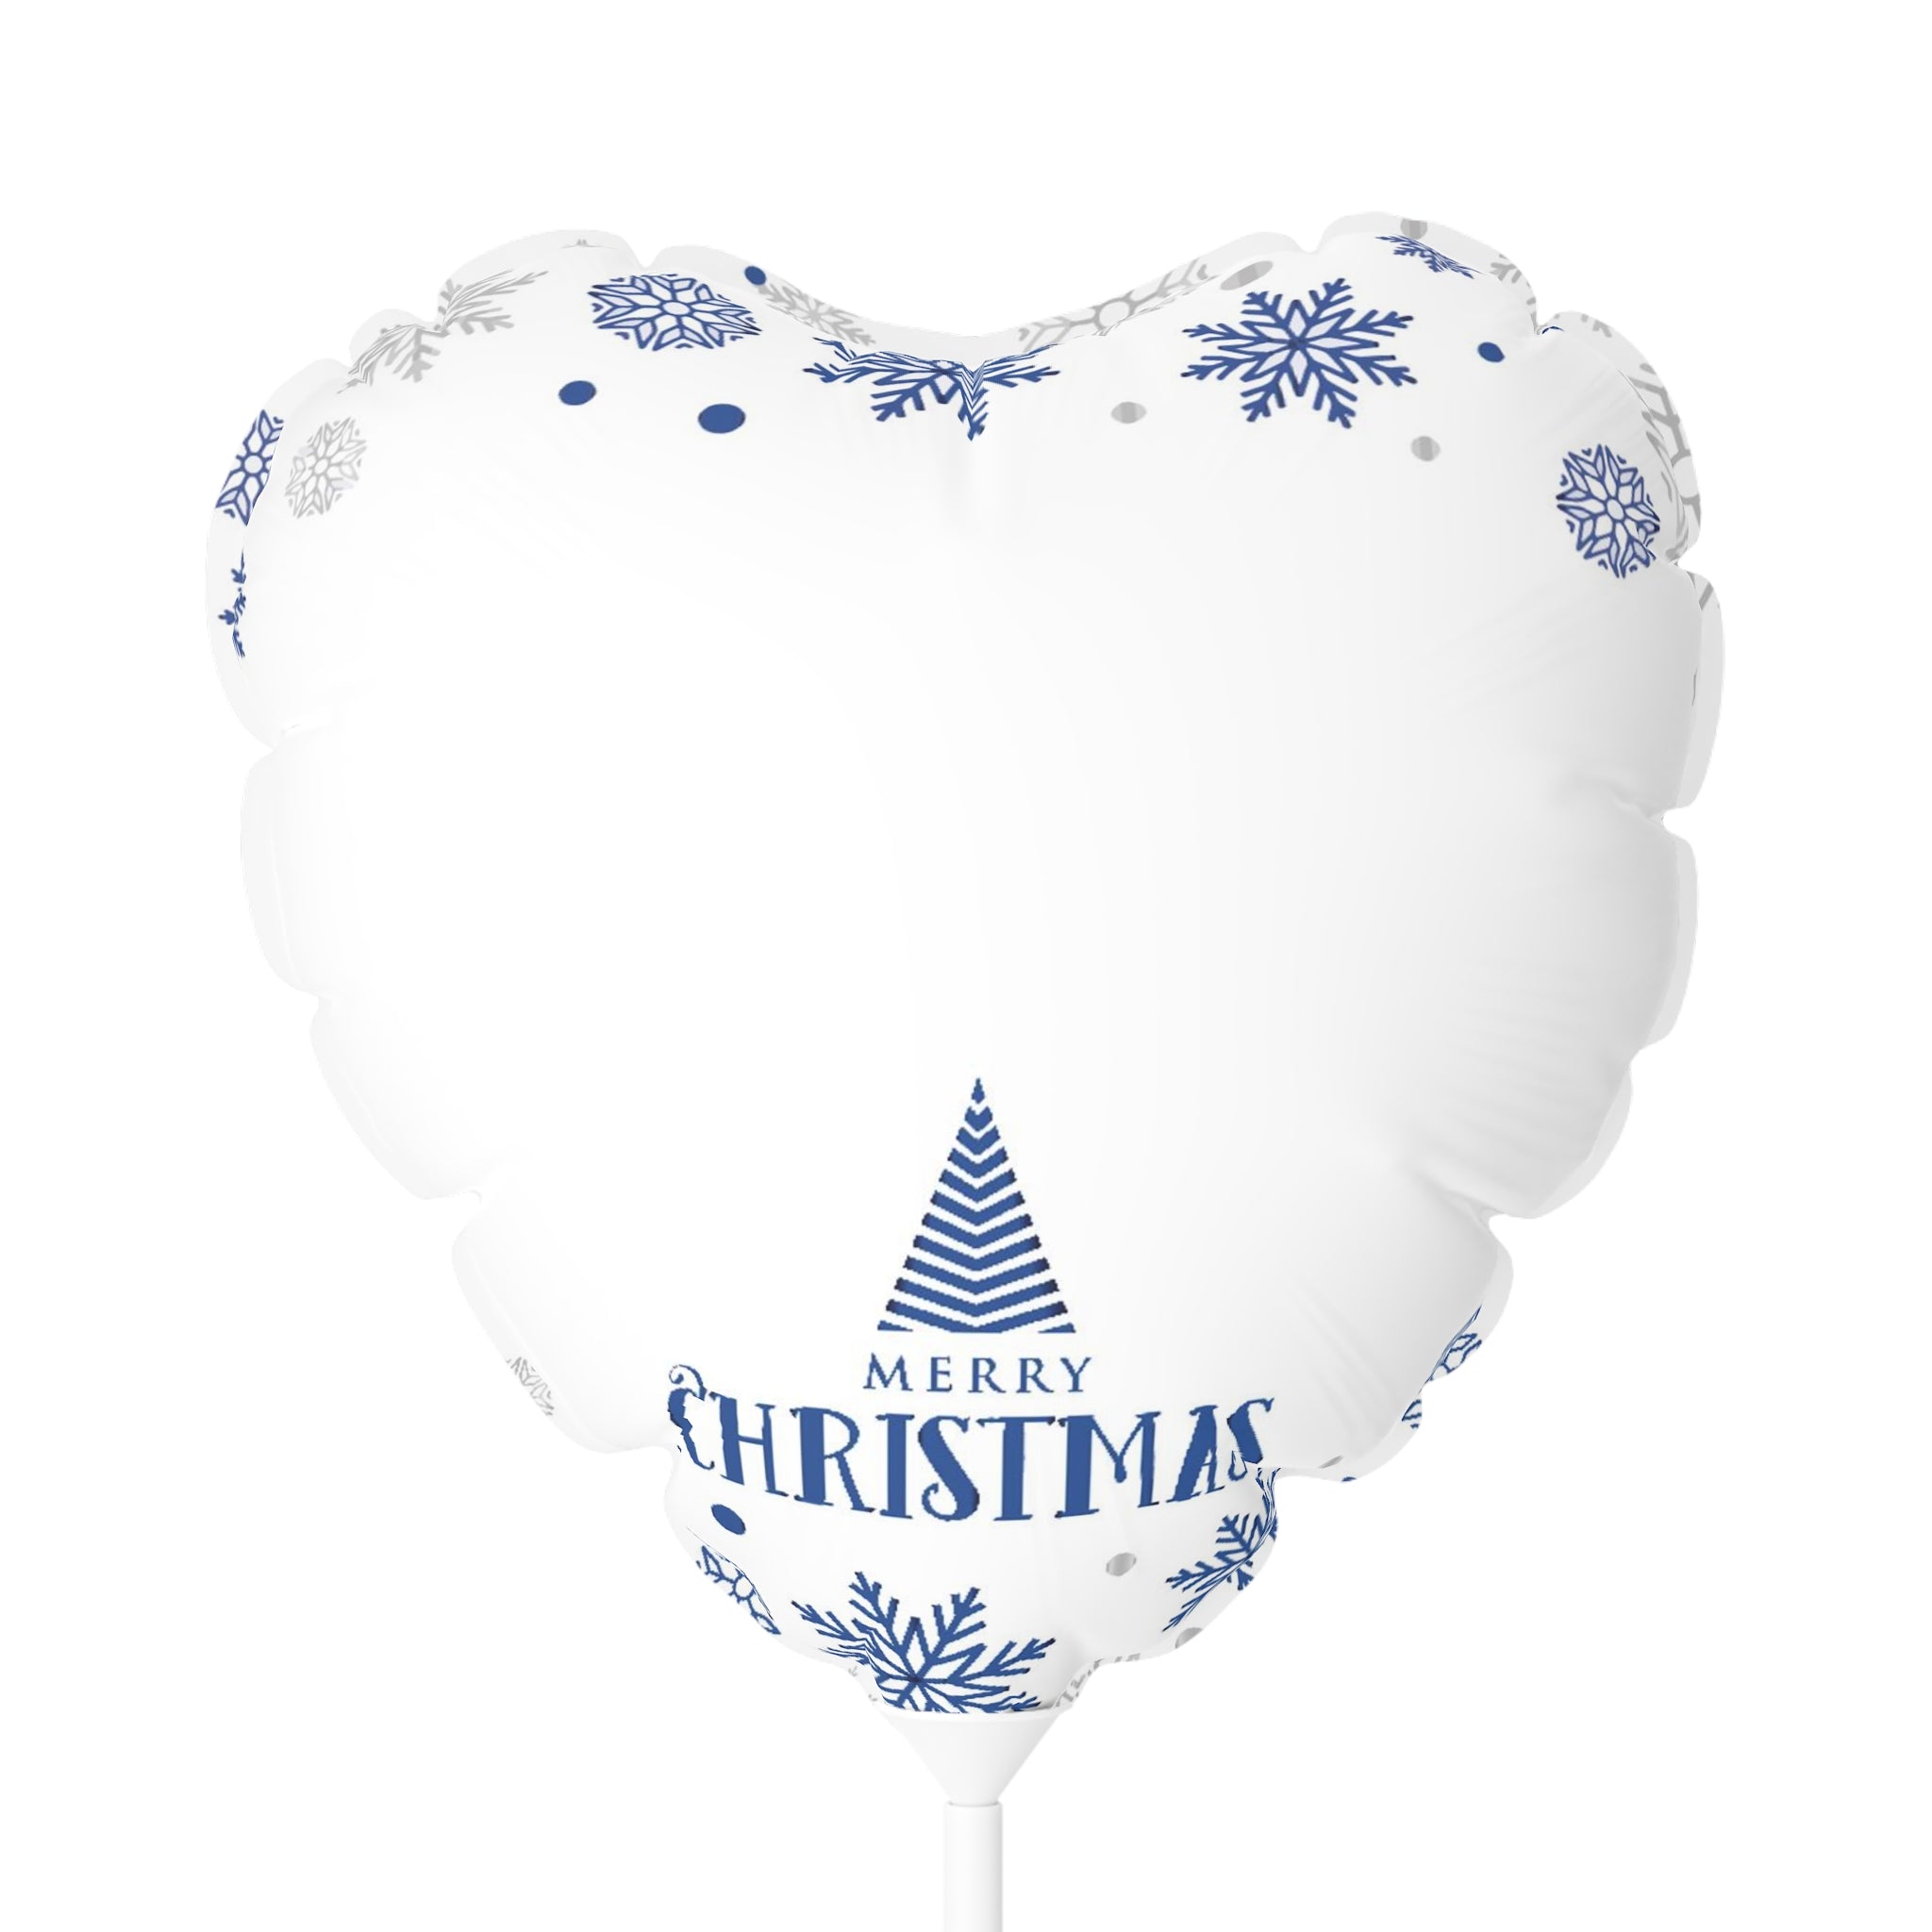 Christmas Balloon (Round and Heart-shaped), 11" White